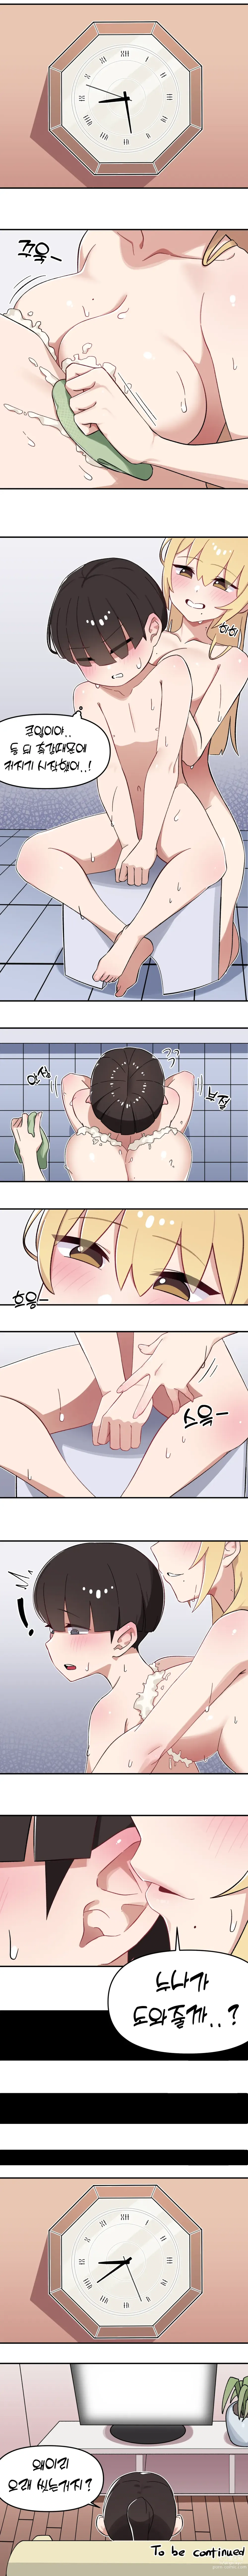 Page 3 of doujinshi My sister and me.